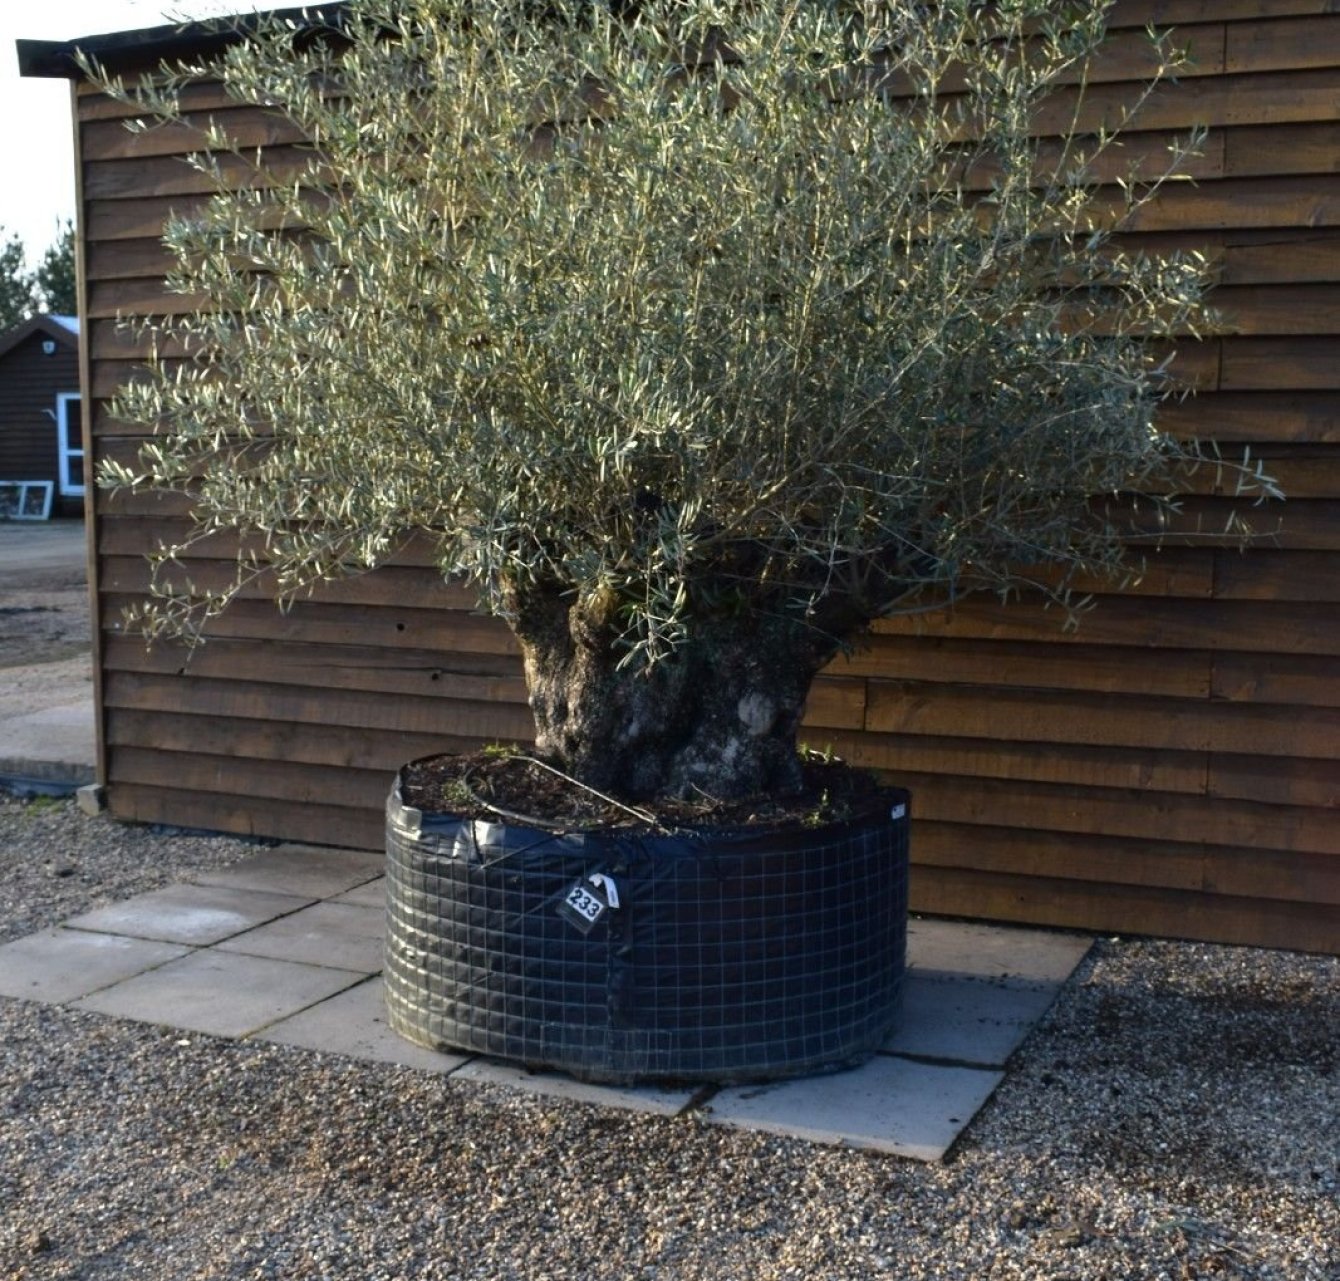 Why Is My Olive Tree Not Fruiting? - Olive Grove Oundle